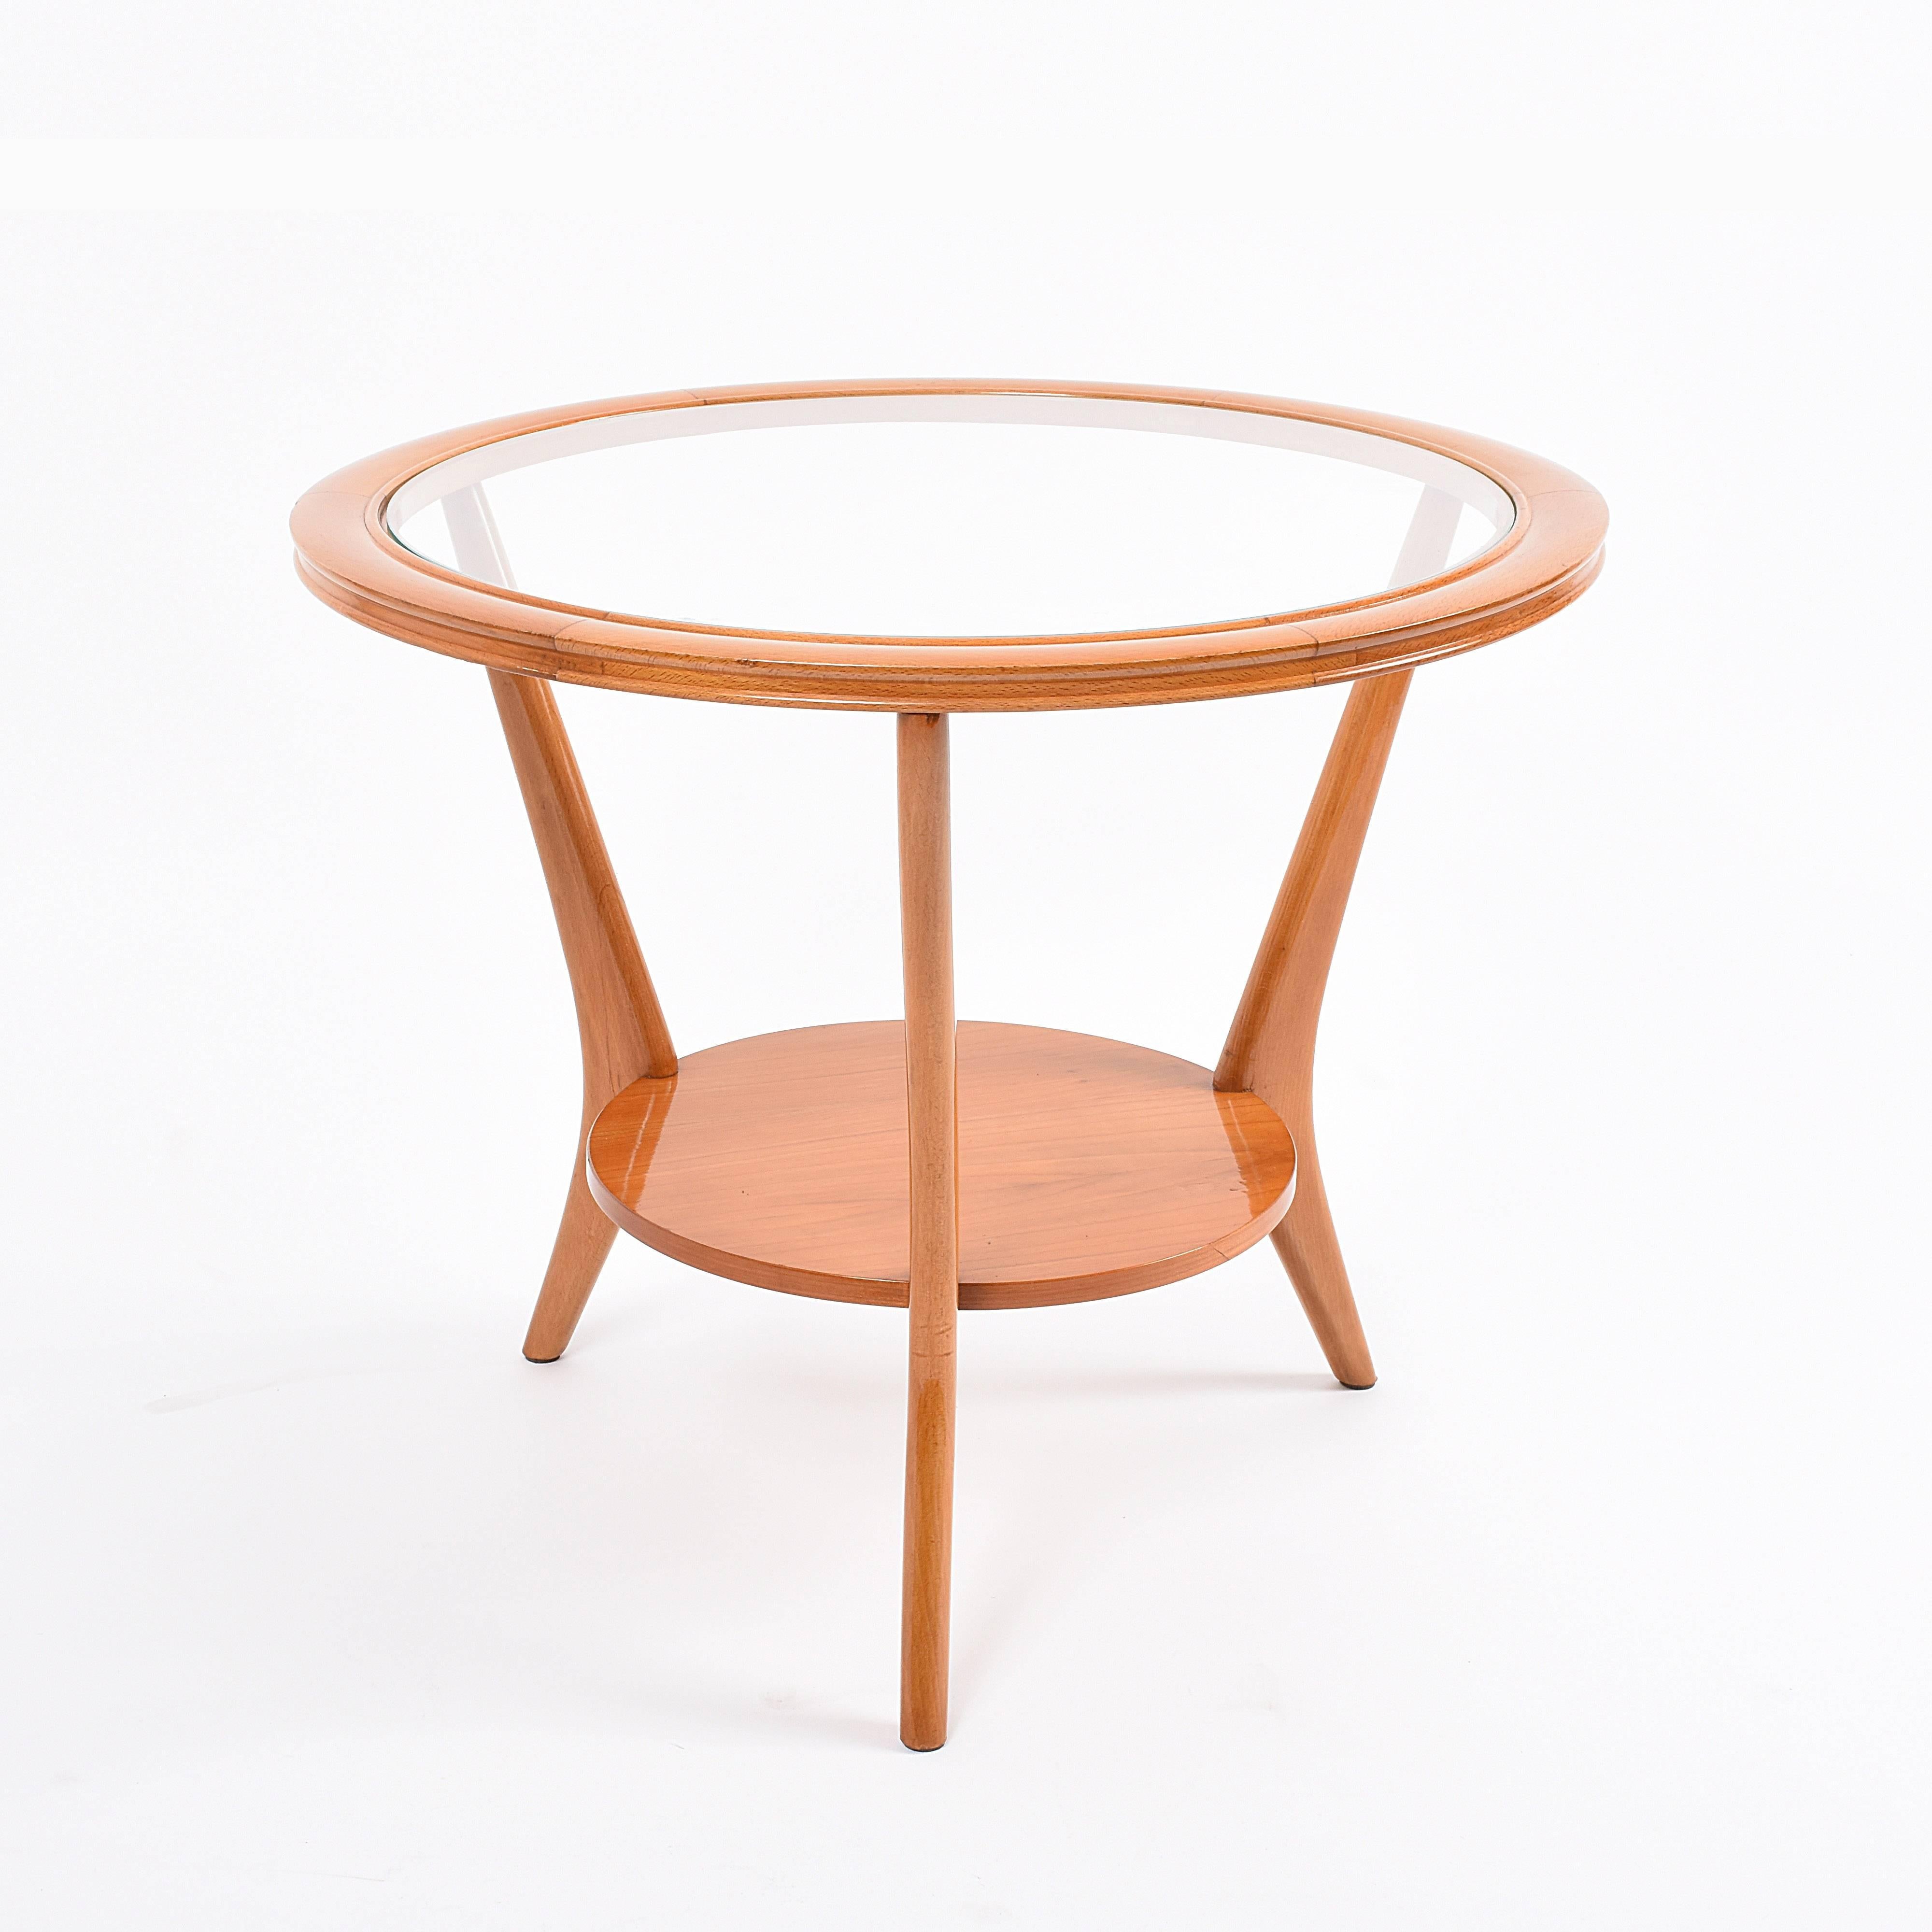 Coffee or smoking tables attributed to Gio Ponti, Italy, 1950s.

The table has been professionally restored and is in wonderful conditions. This table exudes a luxuriant light, given by the perfect combination of wood and glass, that has been